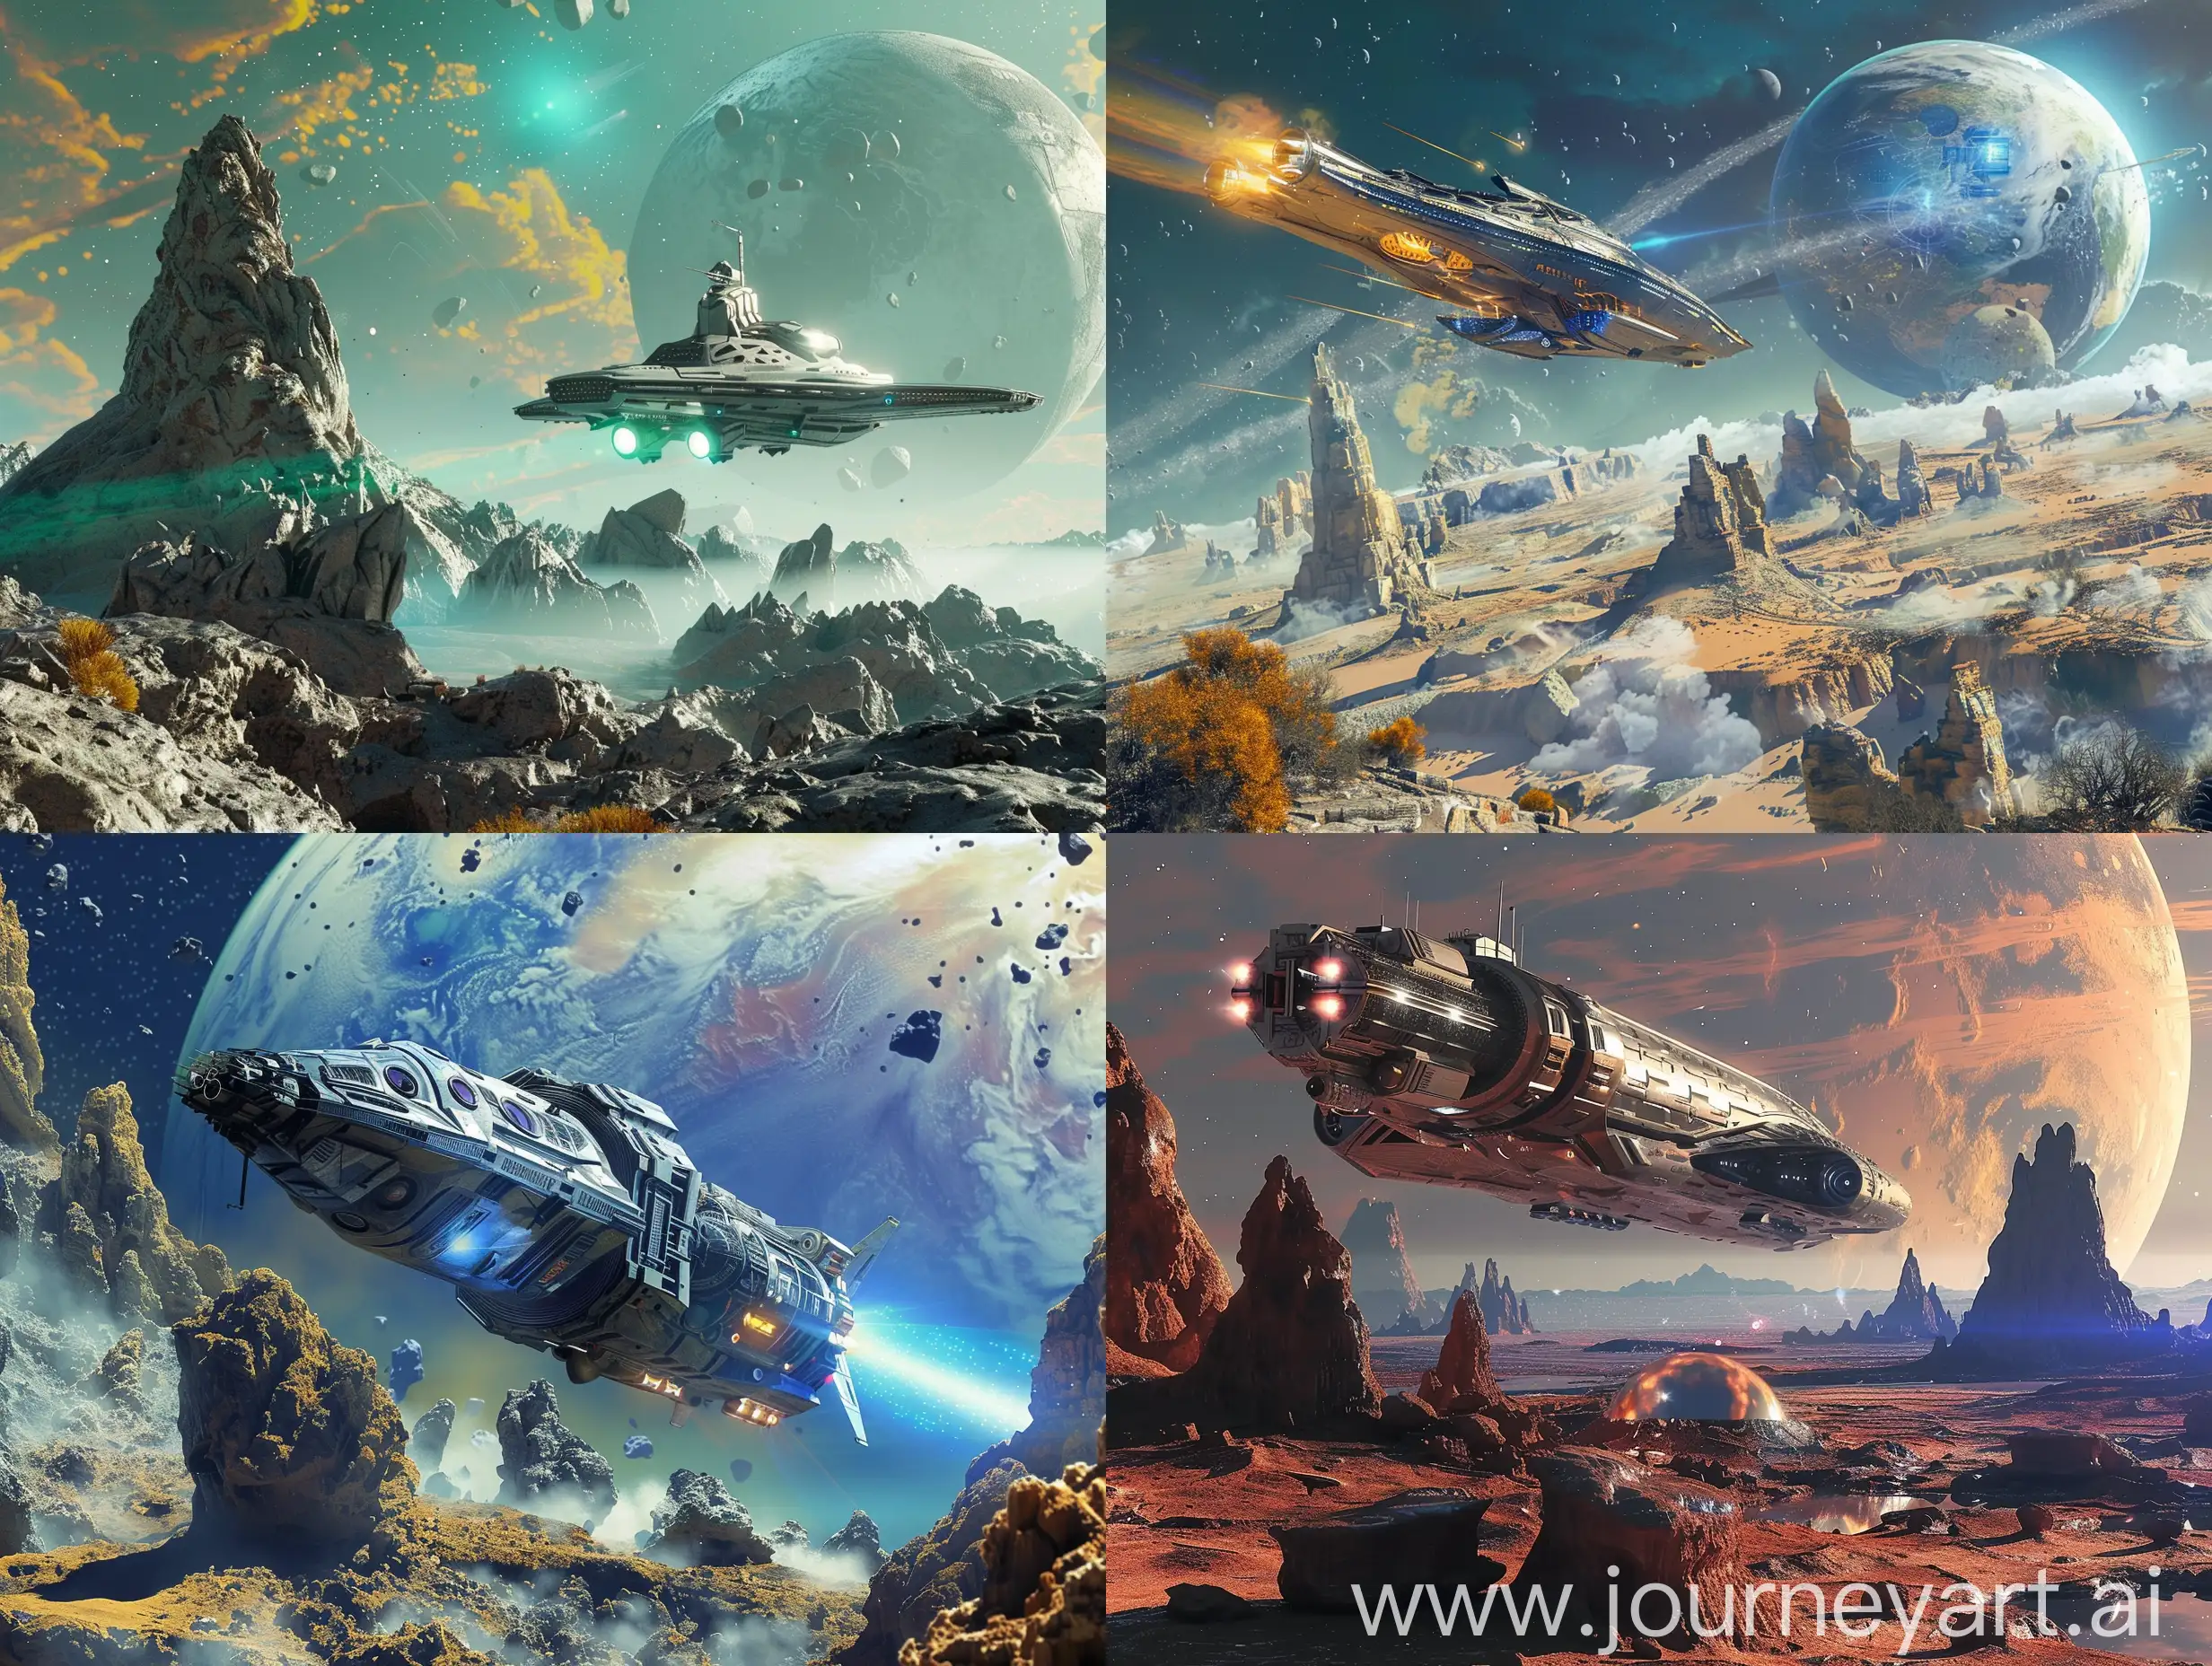 Futuristic-Spaceship-Approaching-Exotic-Planet-with-Ancient-Civilization-Remnants